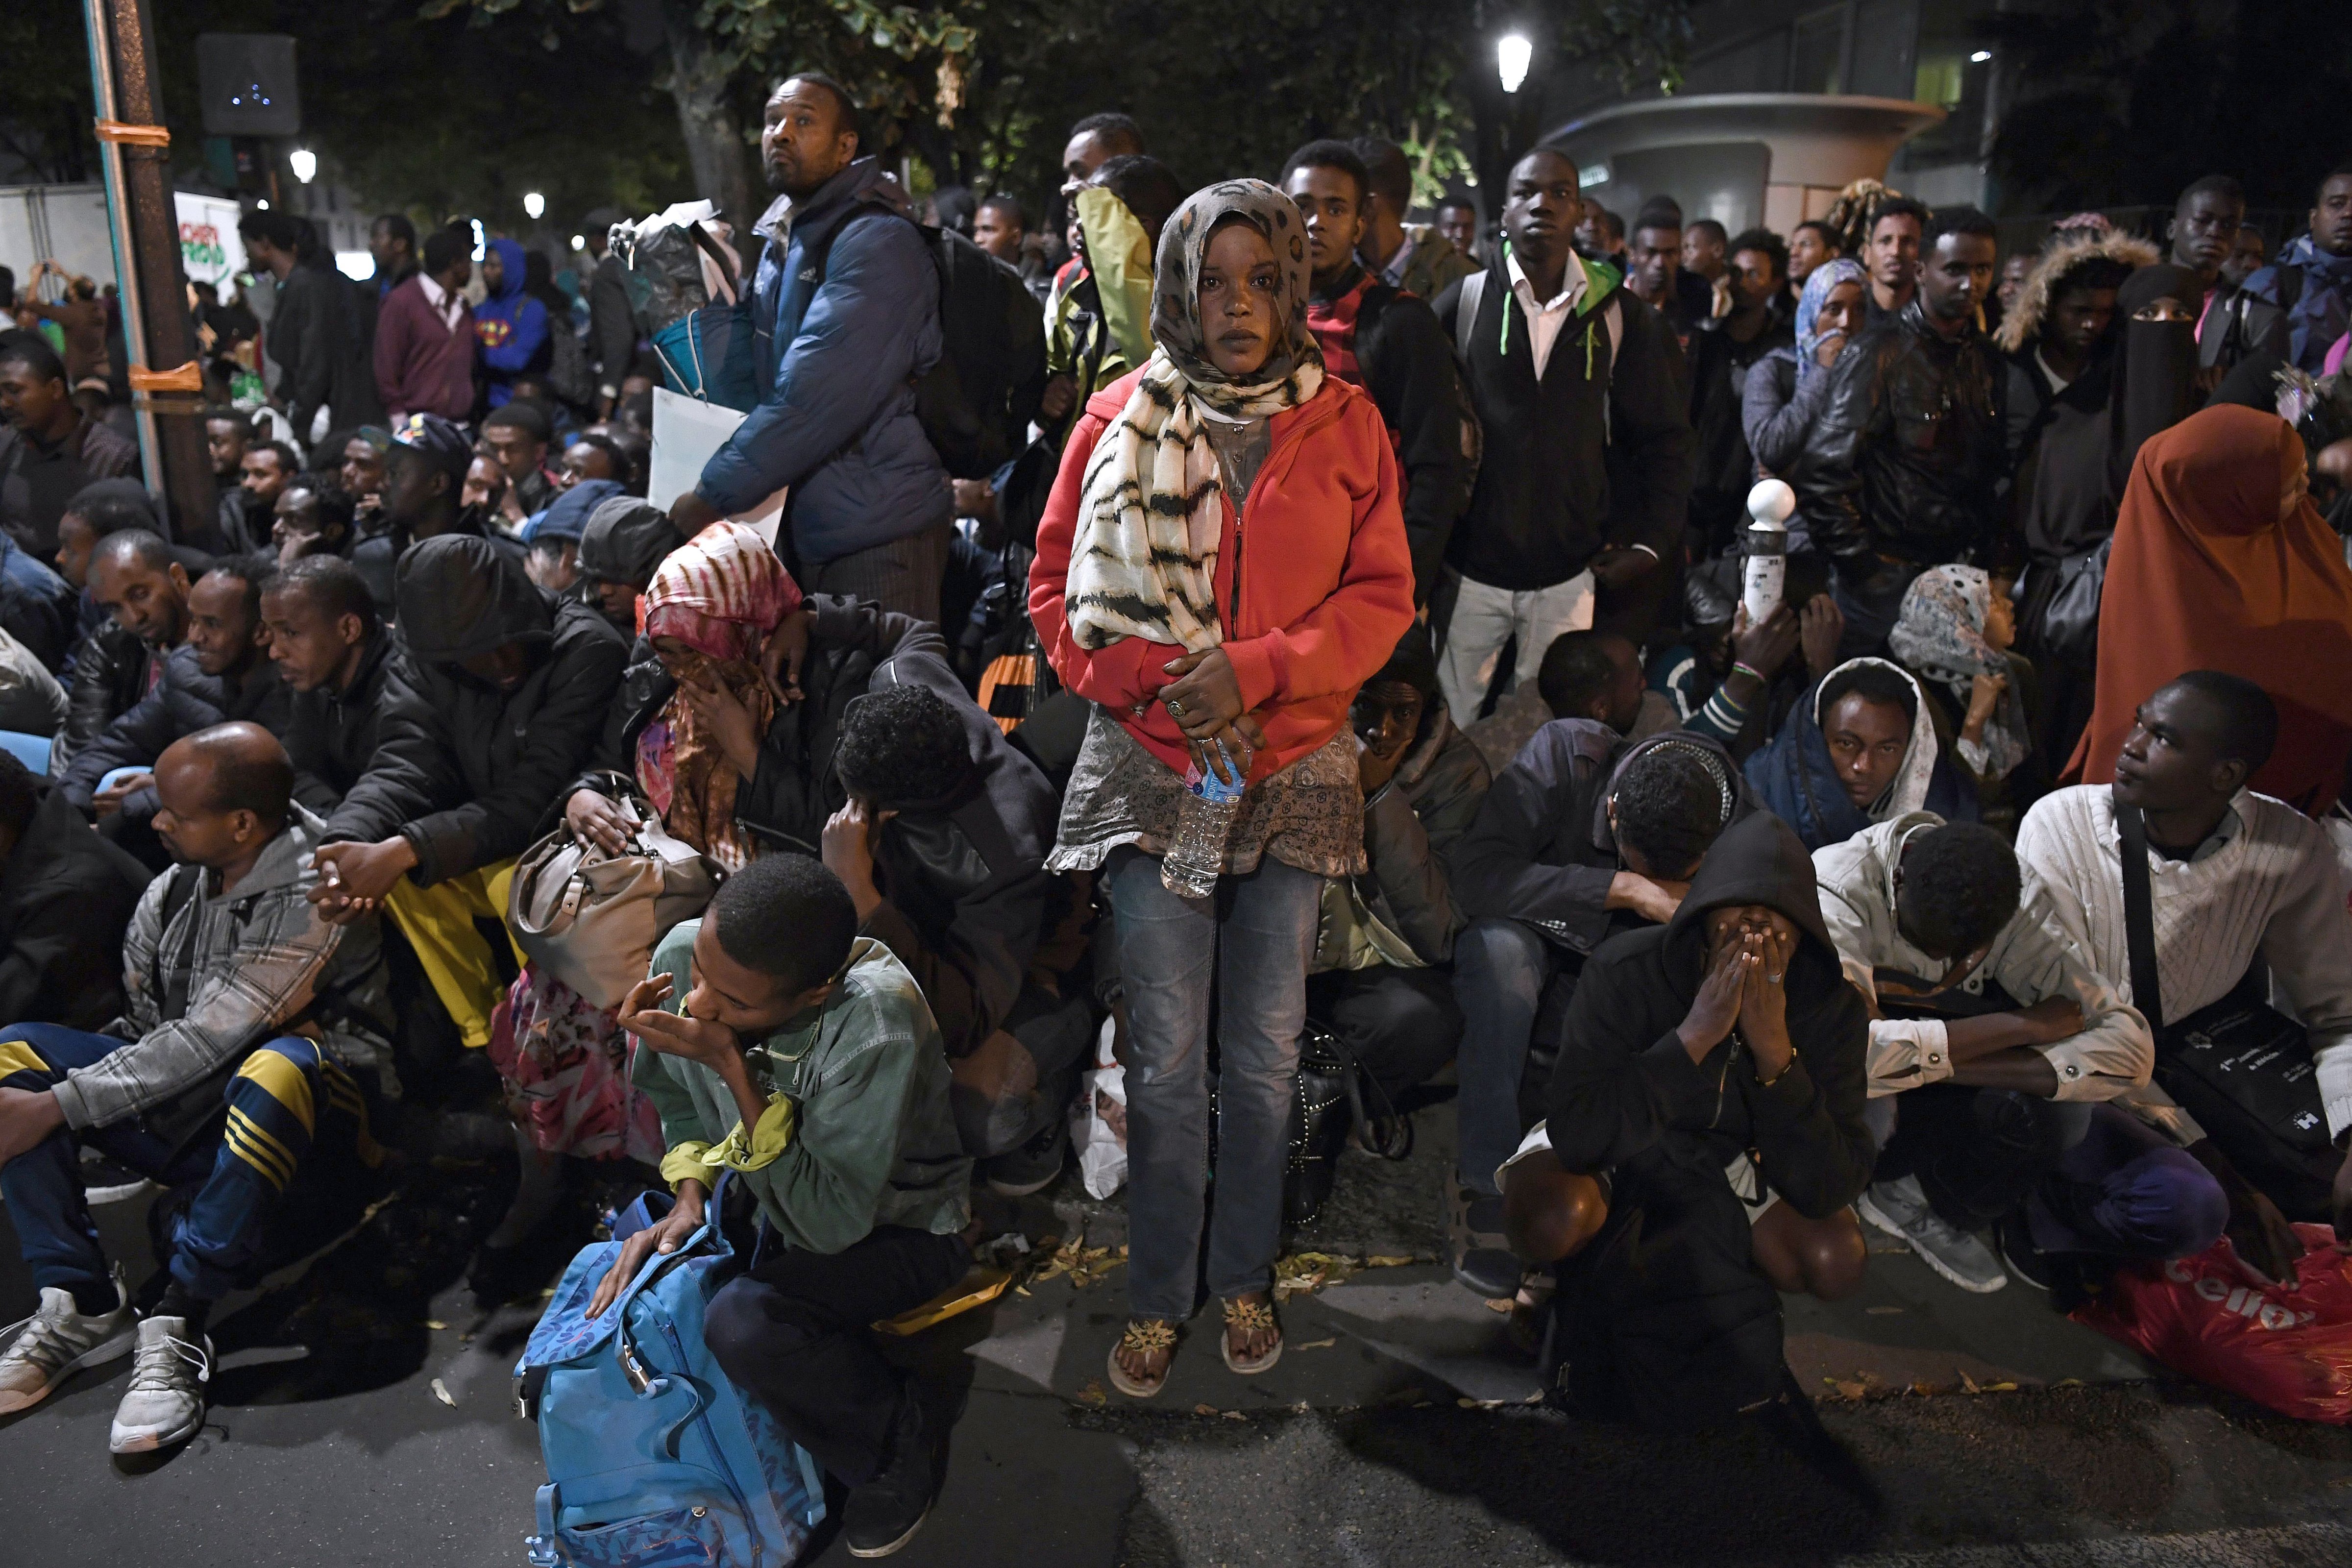 Migrants gather and wait before being evacuated from a makeshift migrant camp set up between the metro stations of Jaures and Stalingrad, in Paris on Sept. 16, 2016. (Christopher Archambaul—AFP/Getty Images)